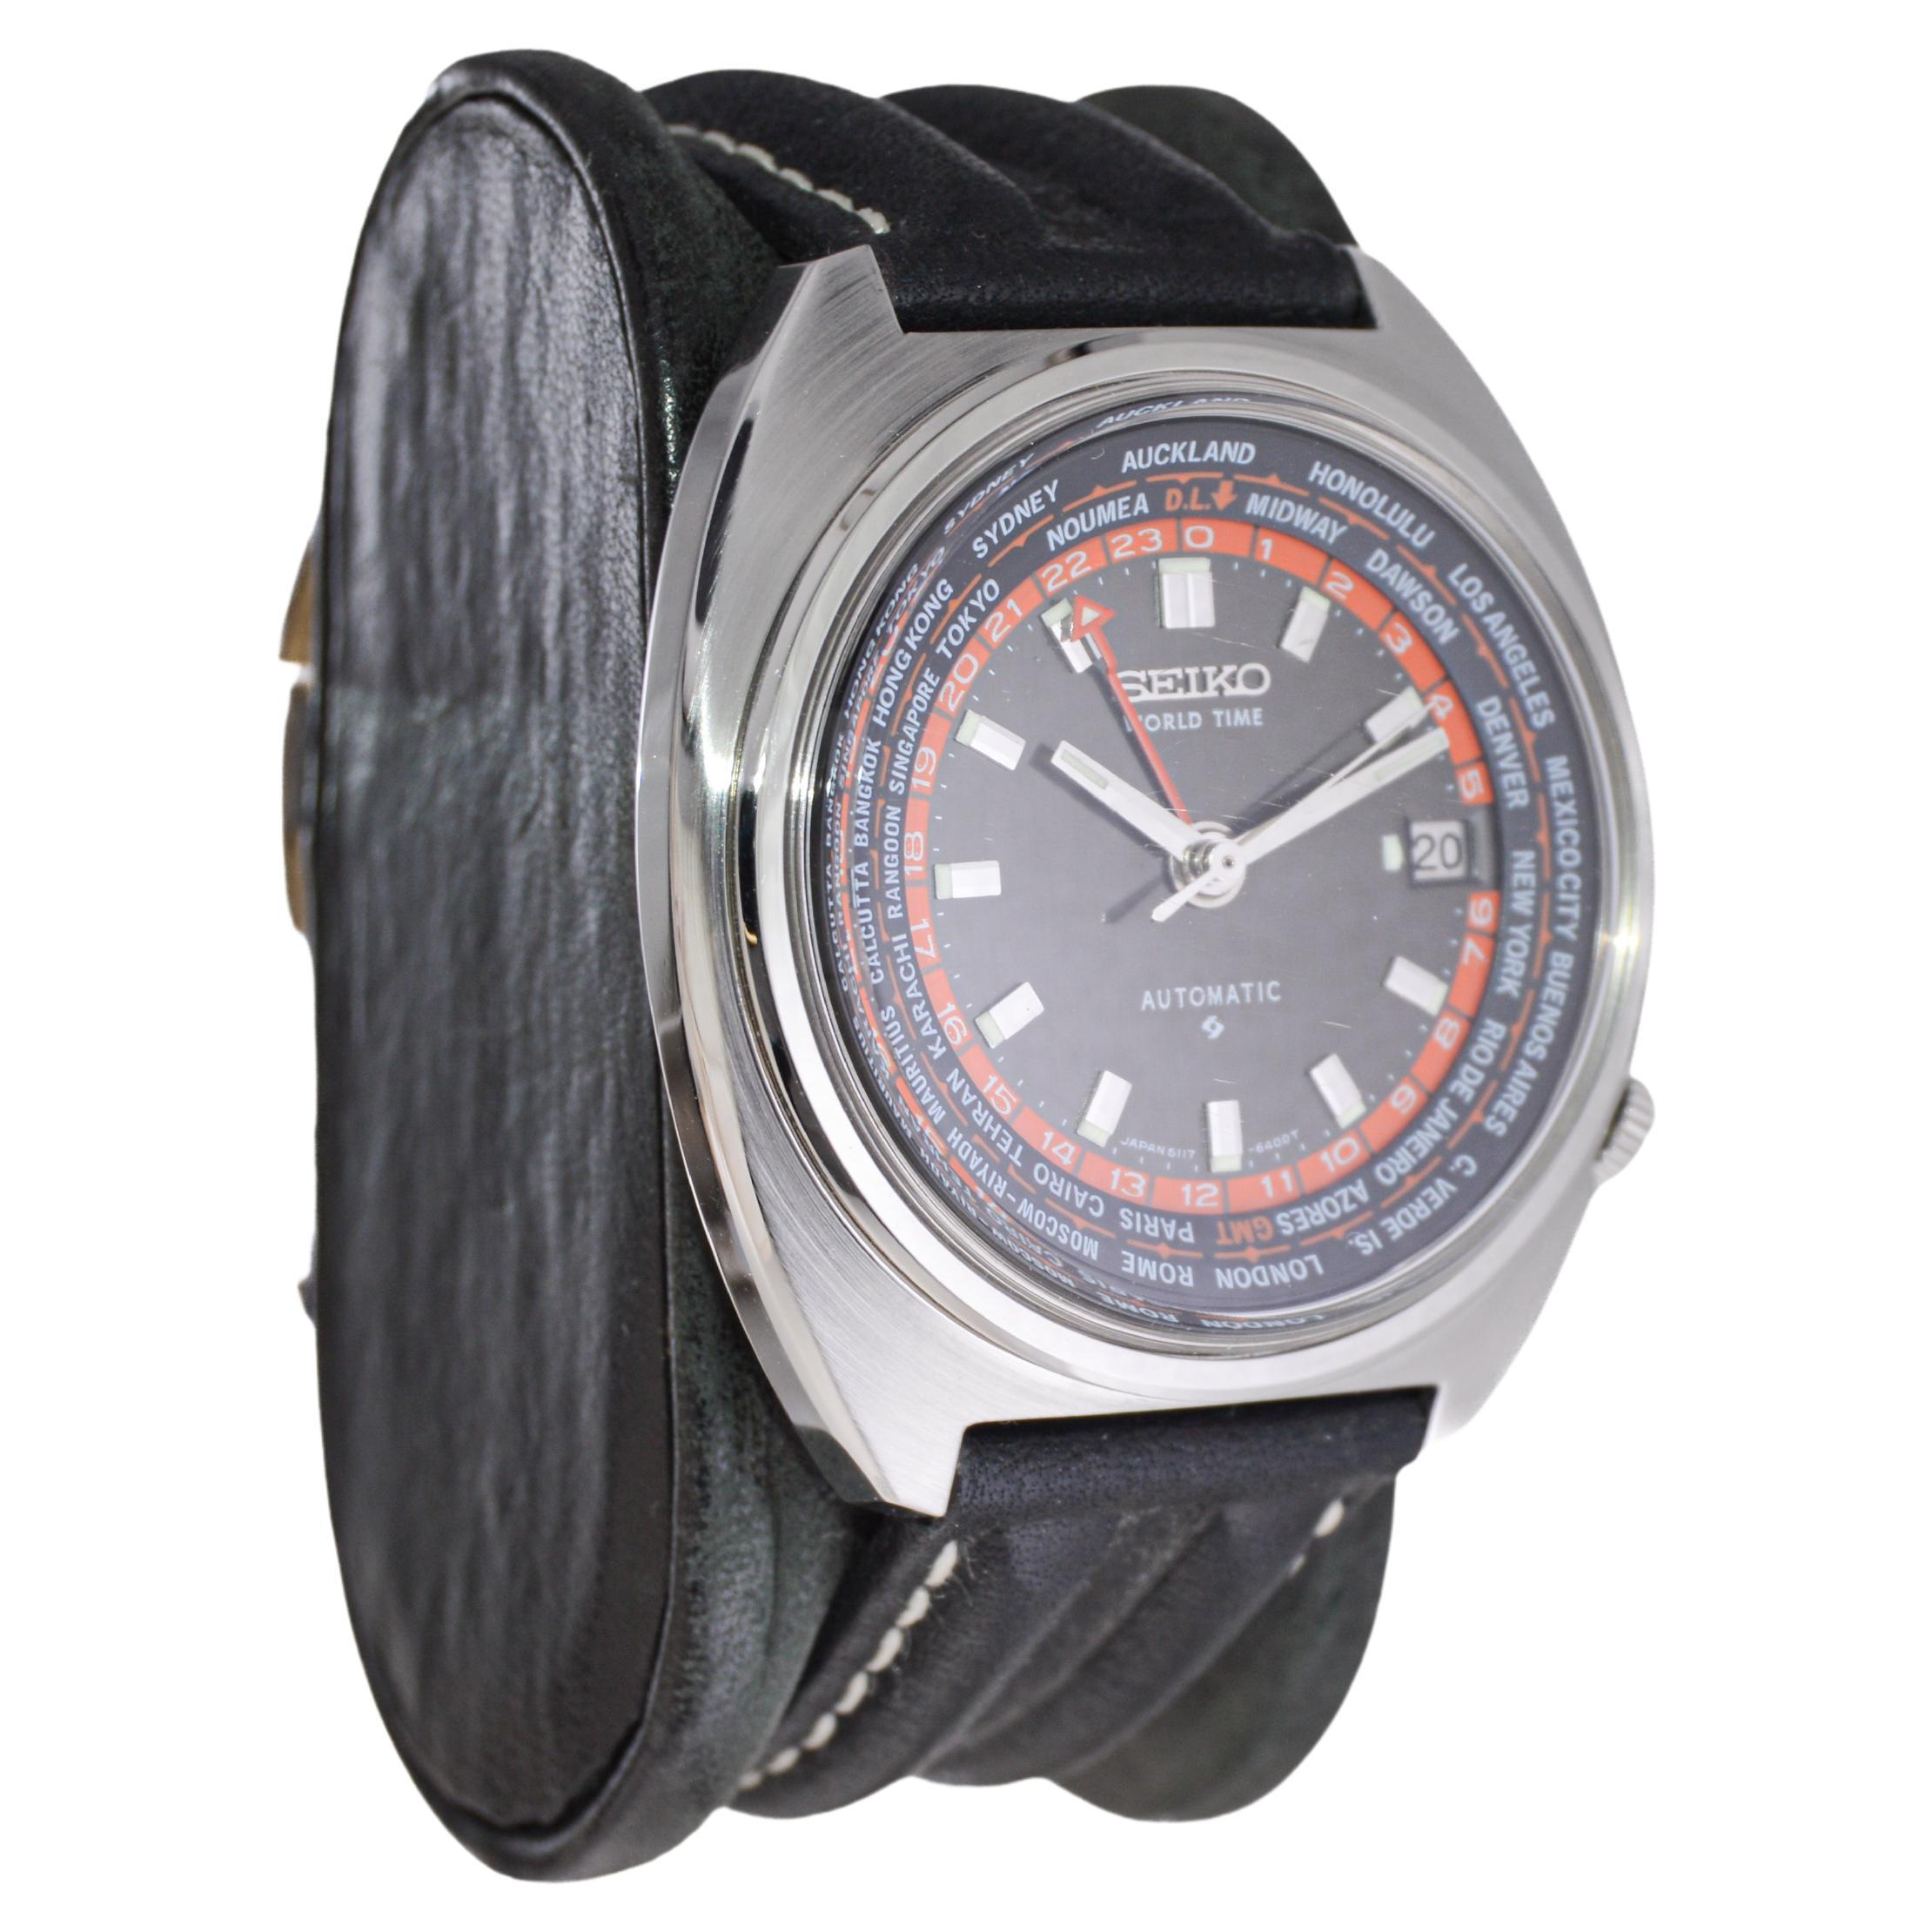 FACTORY / HOUSE: Seiko Watch Company
STYLE / REFERENCE: World time / Tonneau Shape
METAL / MATERIAL: Stainless Steel
CIRCA / YEAR: 1970's
DIMENSIONS / SIZE: Length 41mm X Width 46mm
MOVEMENT / CALIBER: Automatic Winding / 17 Jewels / Caliber